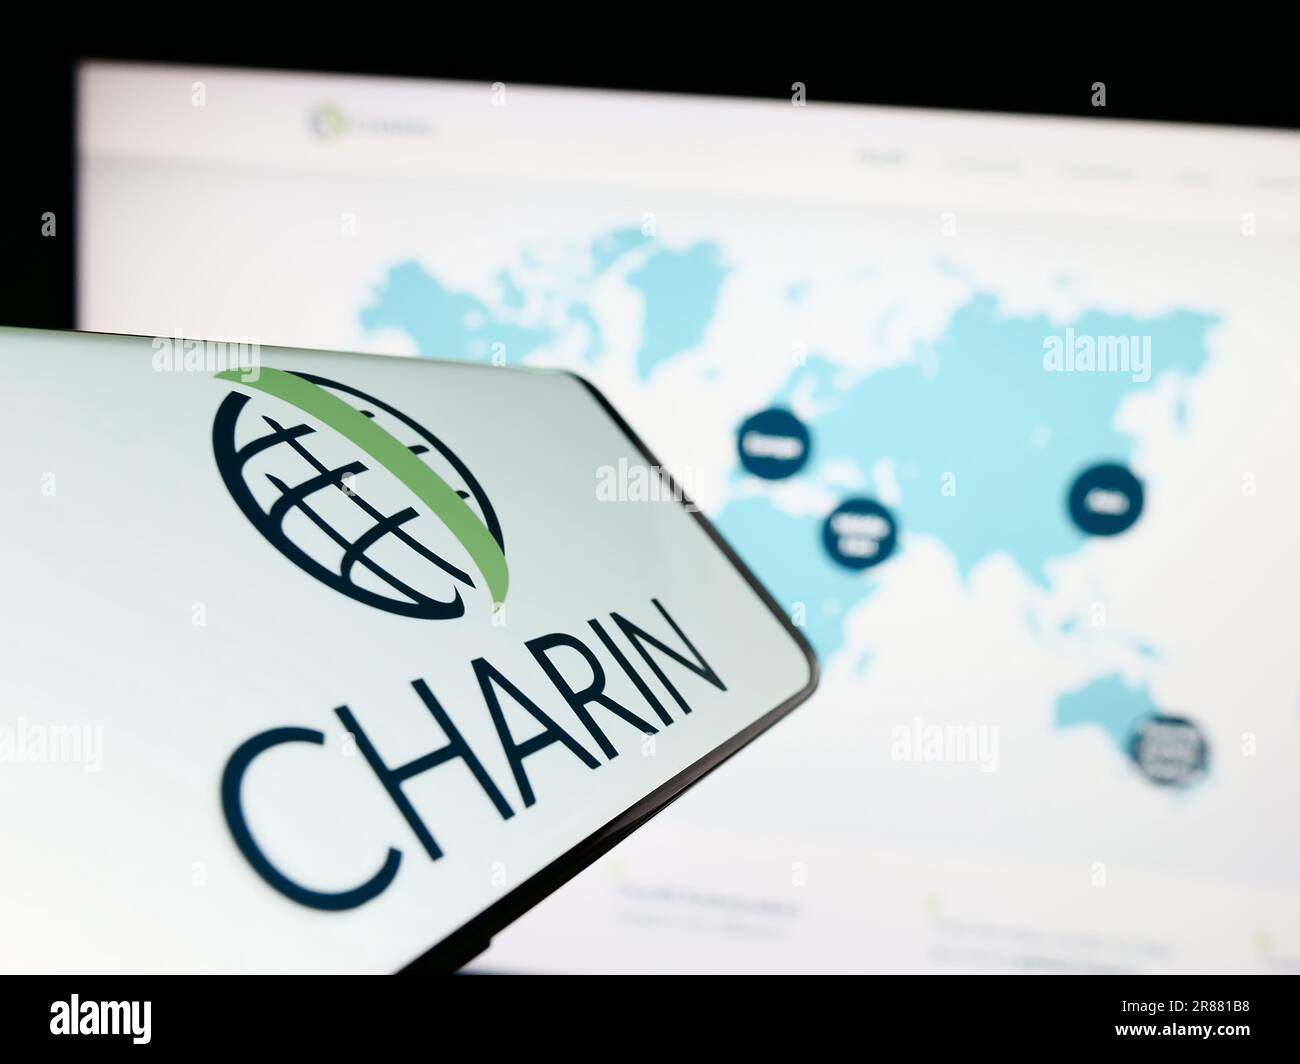 Smartphone with logo of global charging association CharIN e.V. on screen in front of website. Focus on center-right of phone display. Stock Photo